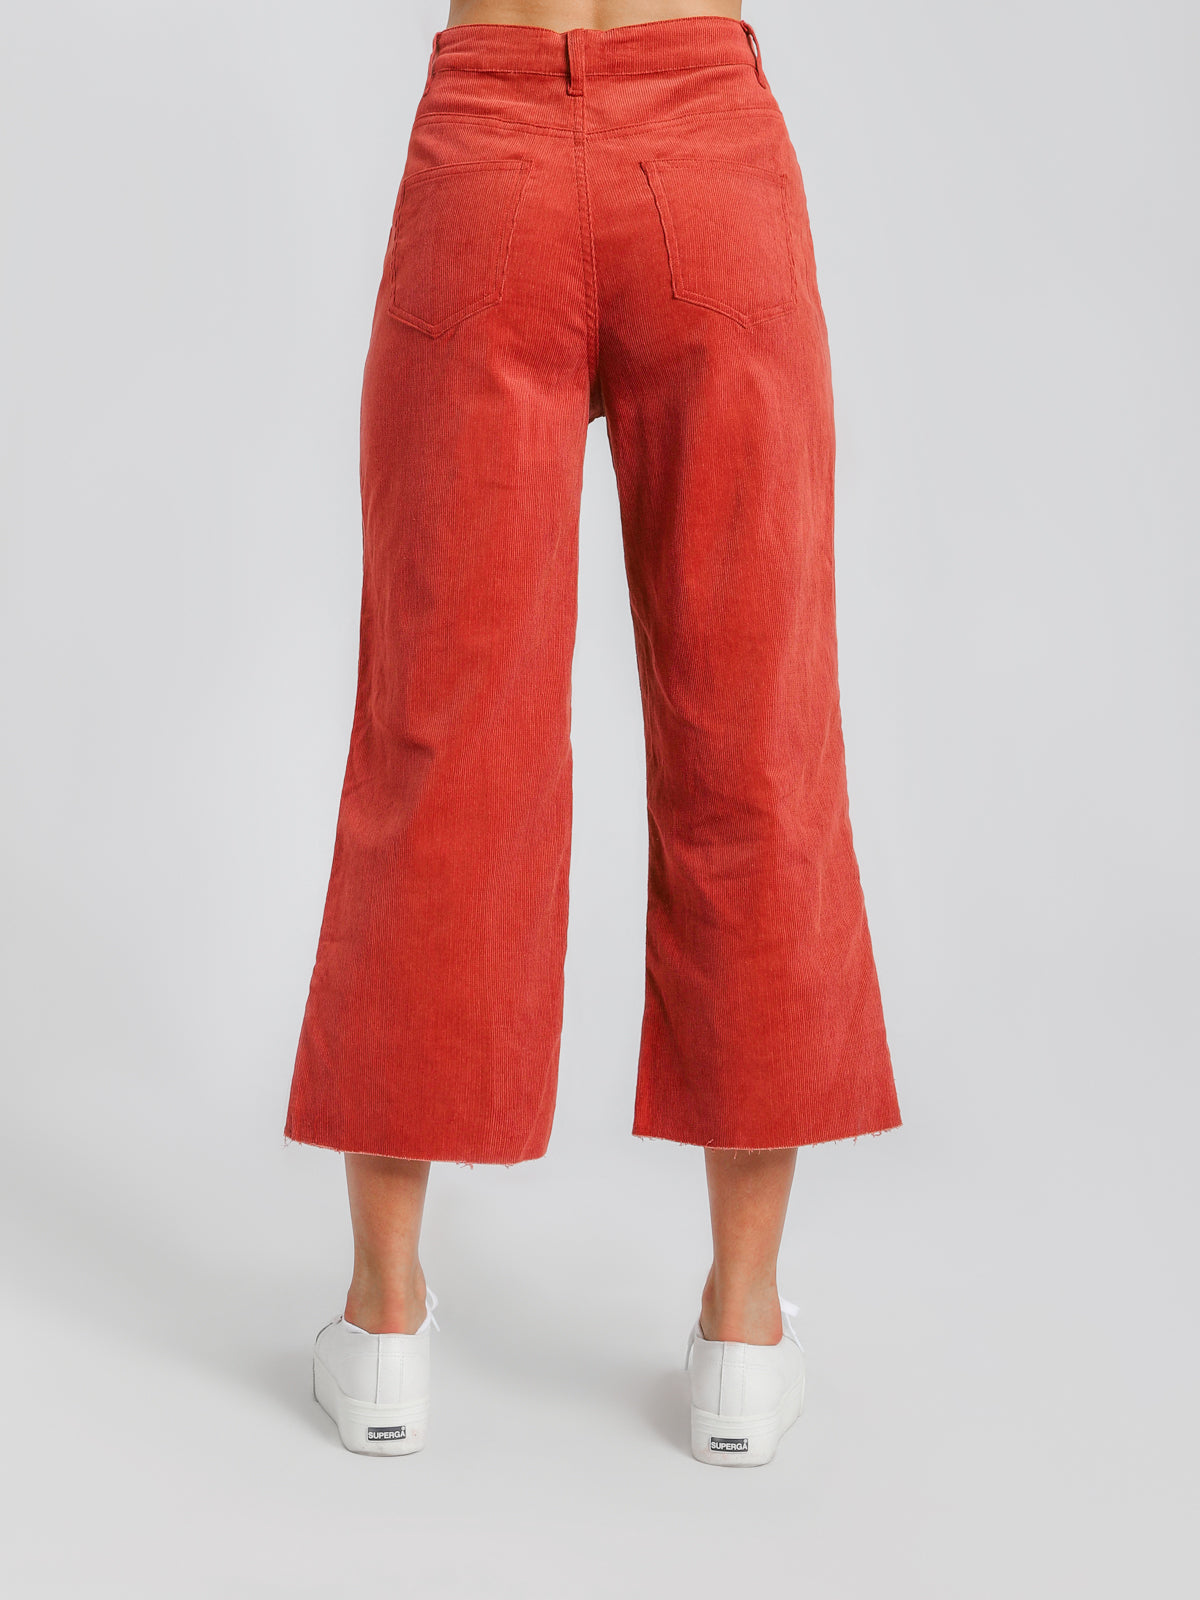 Paige Baby Cord Jeans in Sienna Red